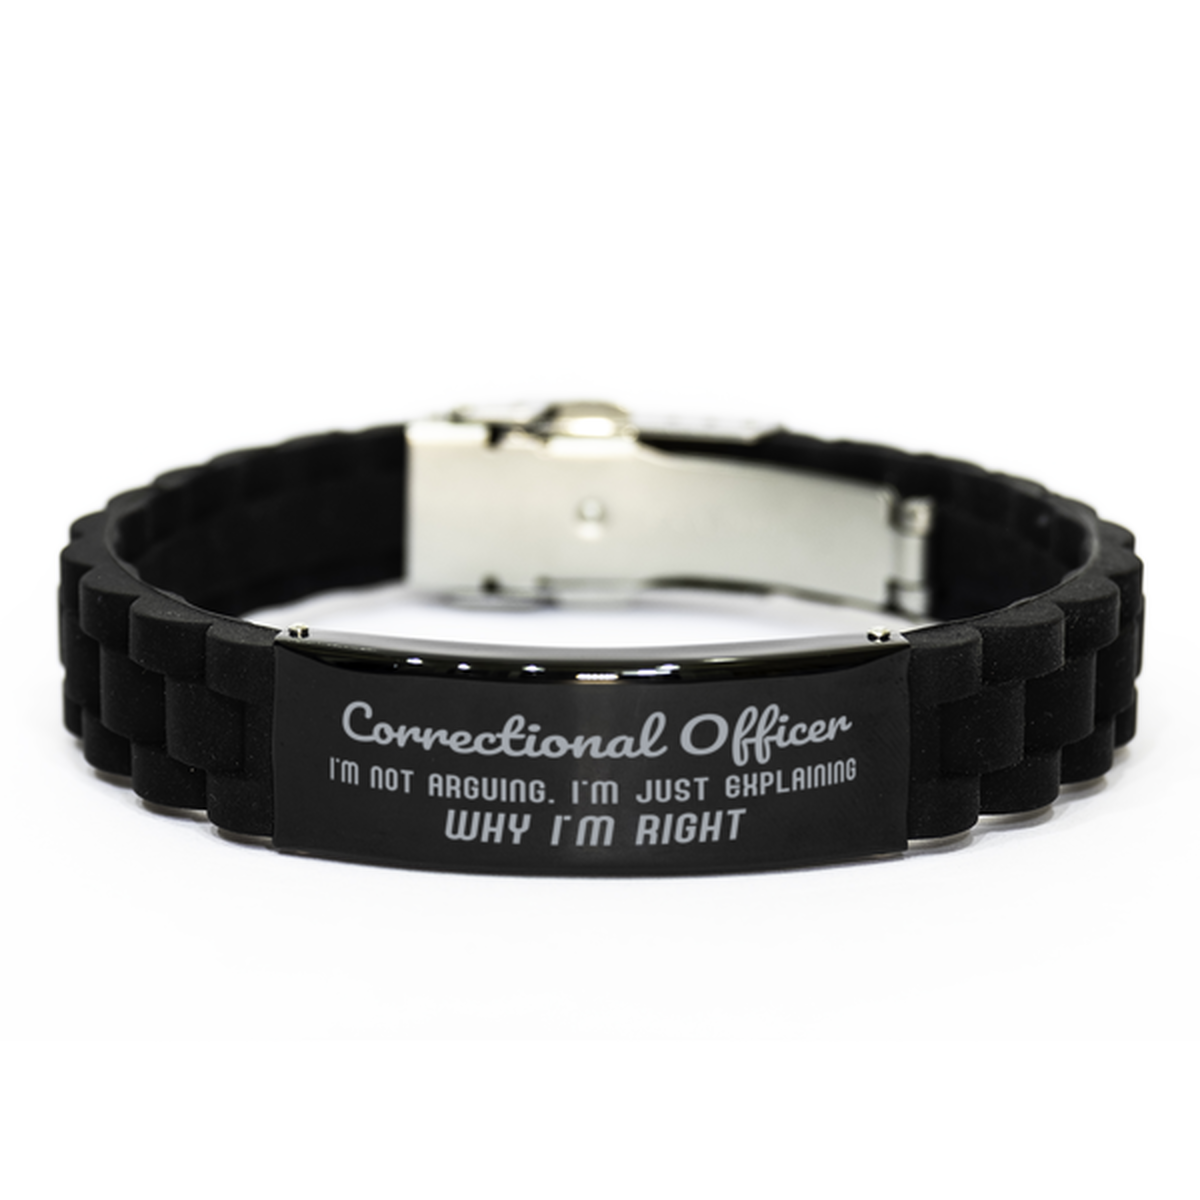 Correctional Officer I'm not Arguing. I'm Just Explaining Why I'm RIGHT Black Glidelock Clasp Bracelet, Funny Saying Quote Correctional Officer Gifts For Correctional Officer Graduation Birthday Christmas Gifts for Men Women Coworker